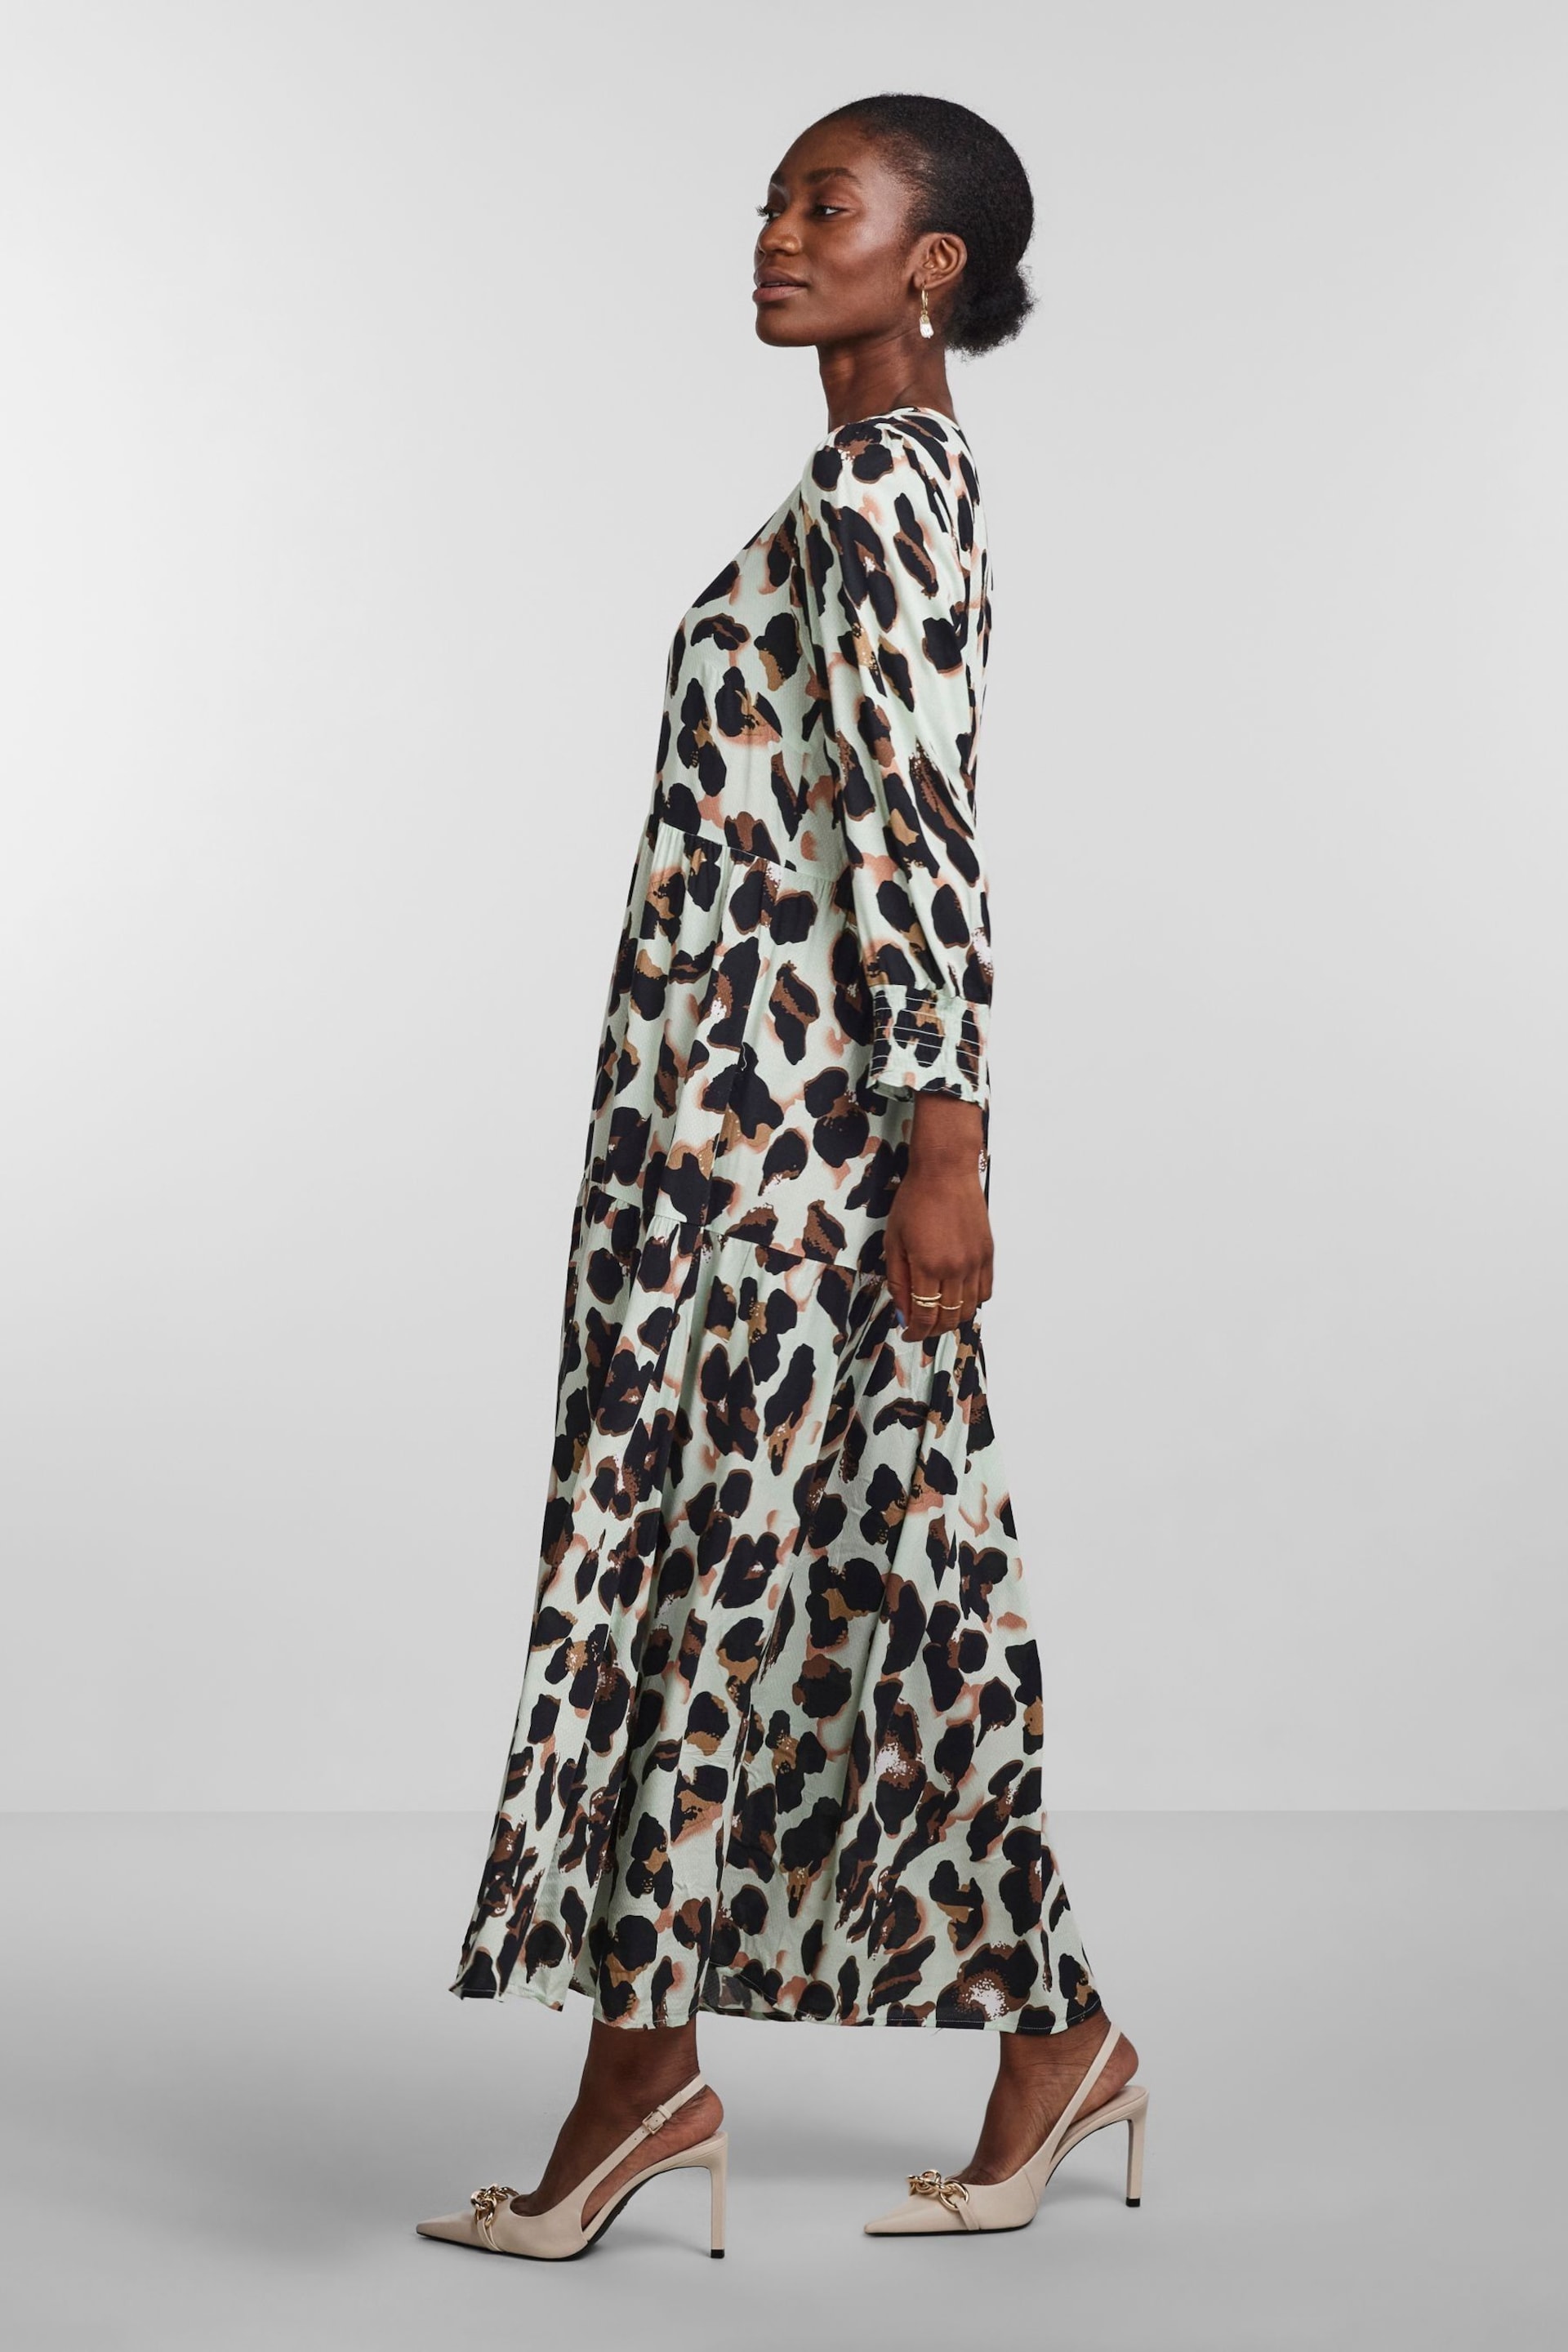 Y.A.S Leopard Print Button Through Midi Printed Dress - Image 2 of 5